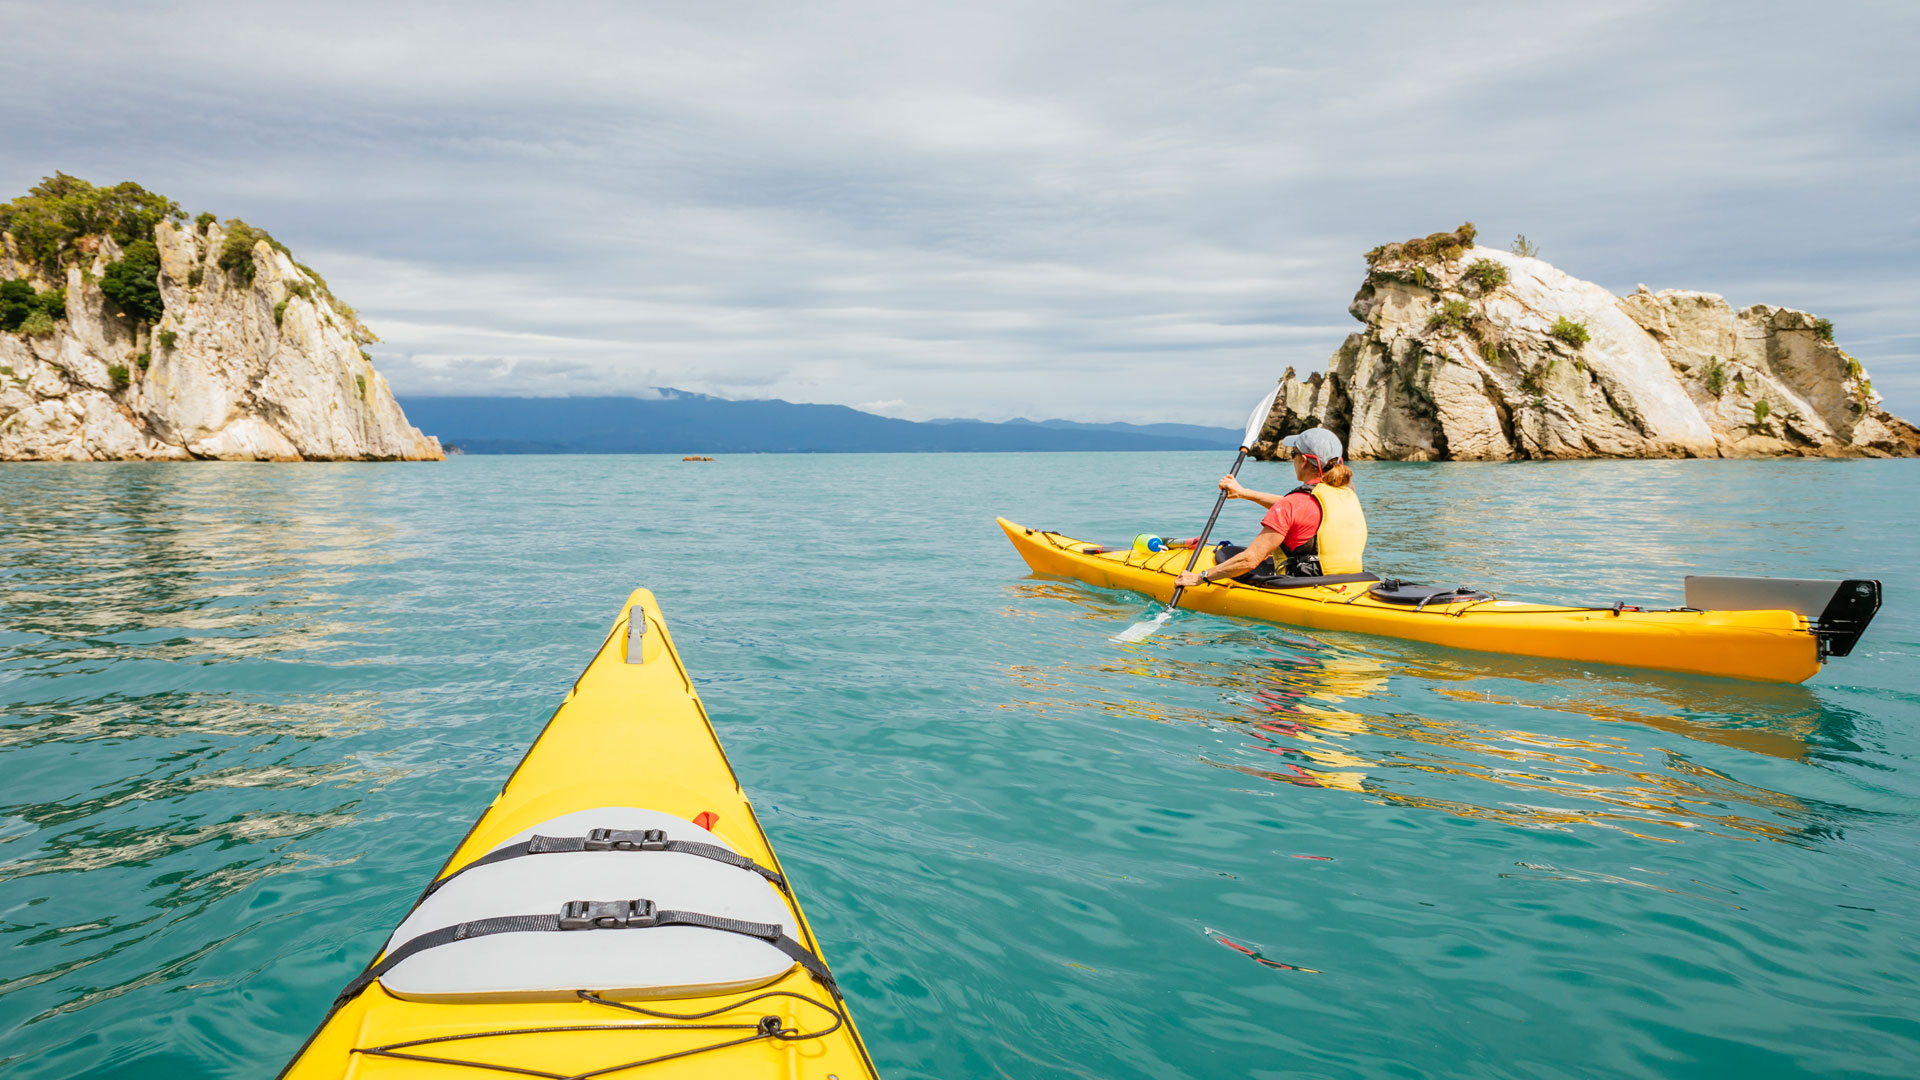 Point of view photograph showing a yellow kayak on the waters of the Abel Tasman in New Zealand.